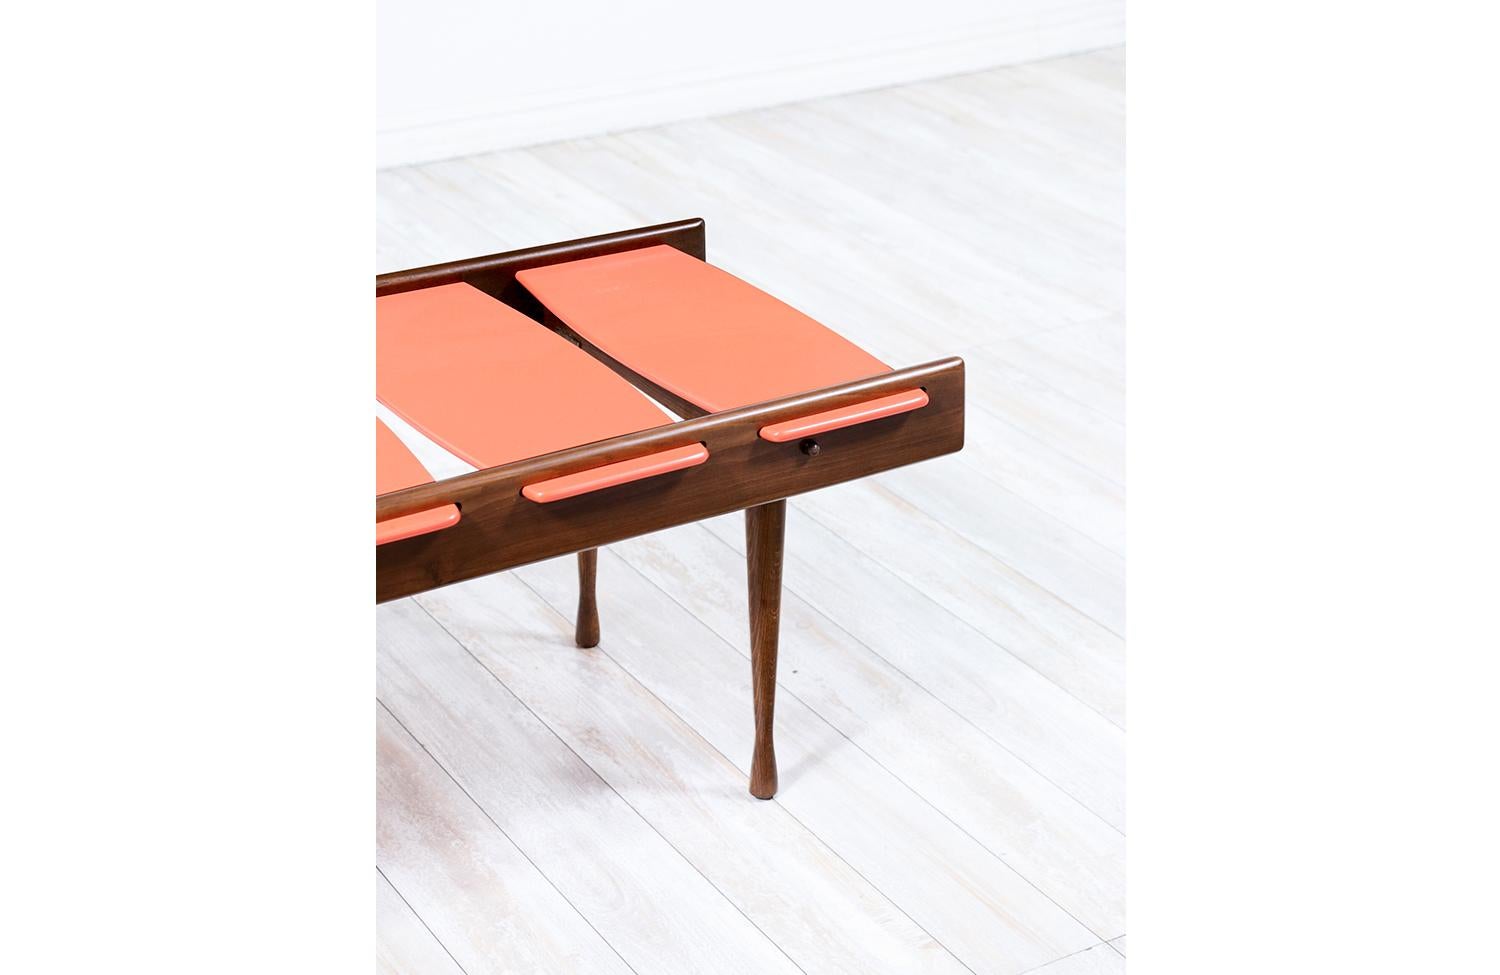  Expertly Restored - Mid-Century Modern Two-Tone Lacquered Coffee Table  In Excellent Condition For Sale In Los Angeles, CA